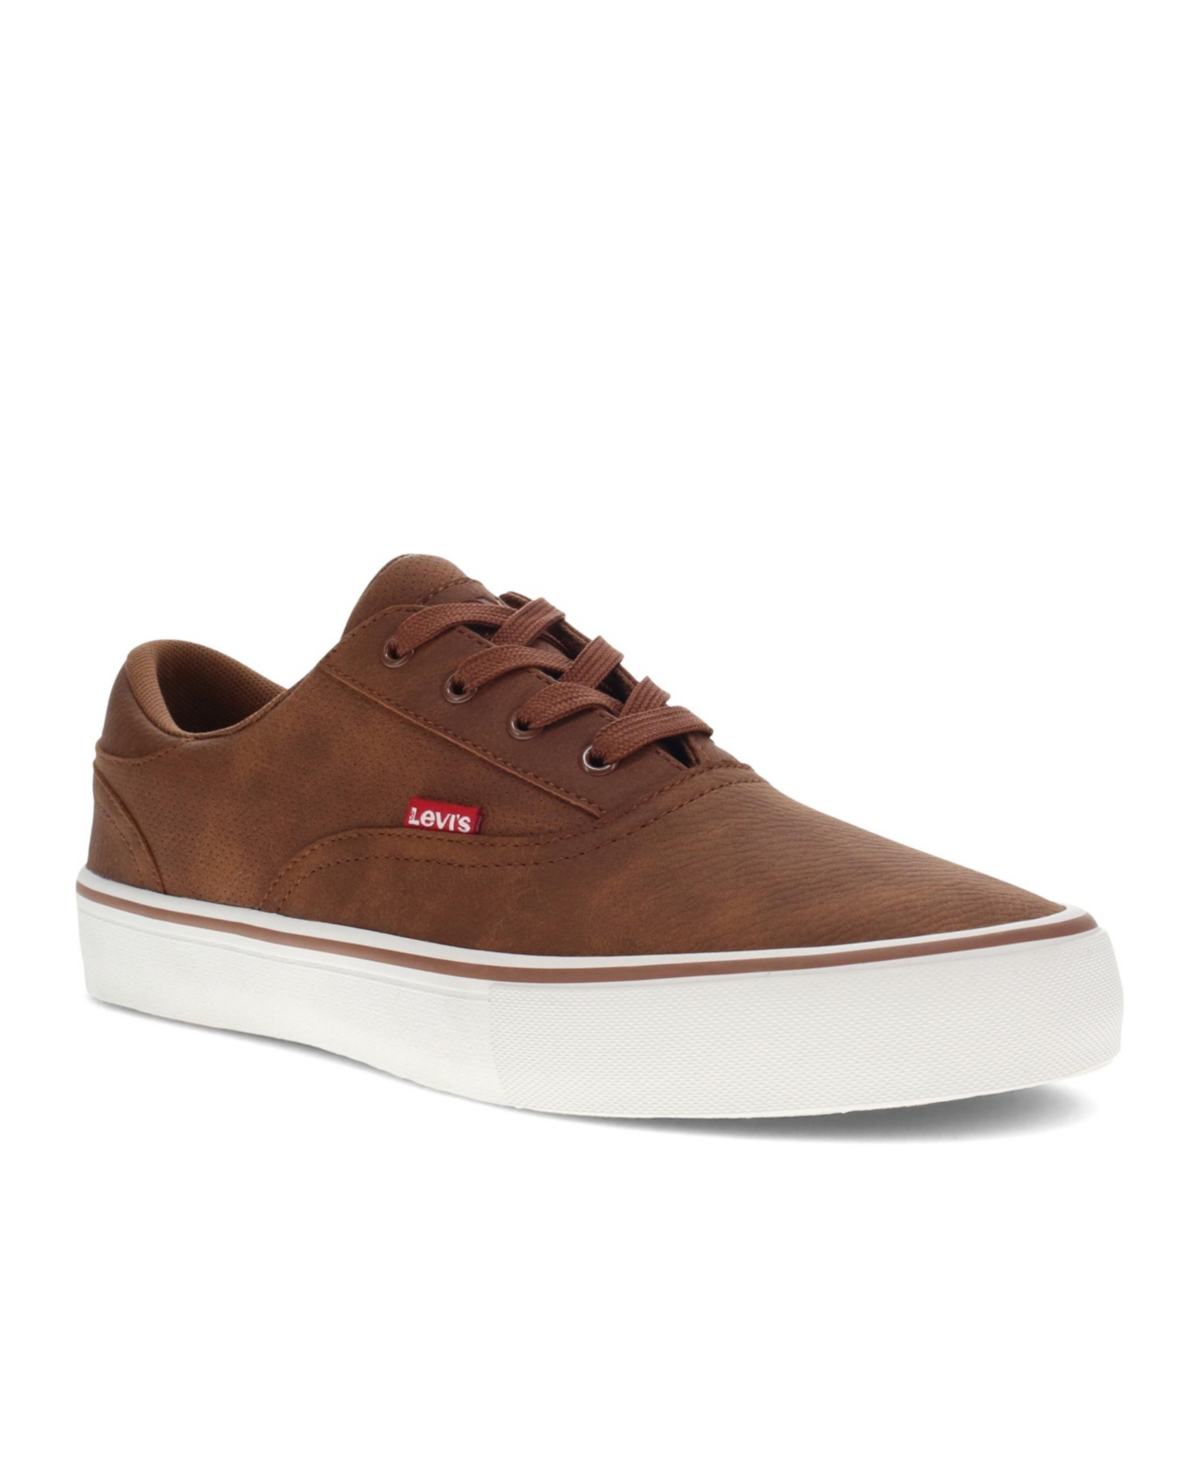 Levi's Men's Ethan S Wx Lace-up Sneakers Men's Shoes In British Tan